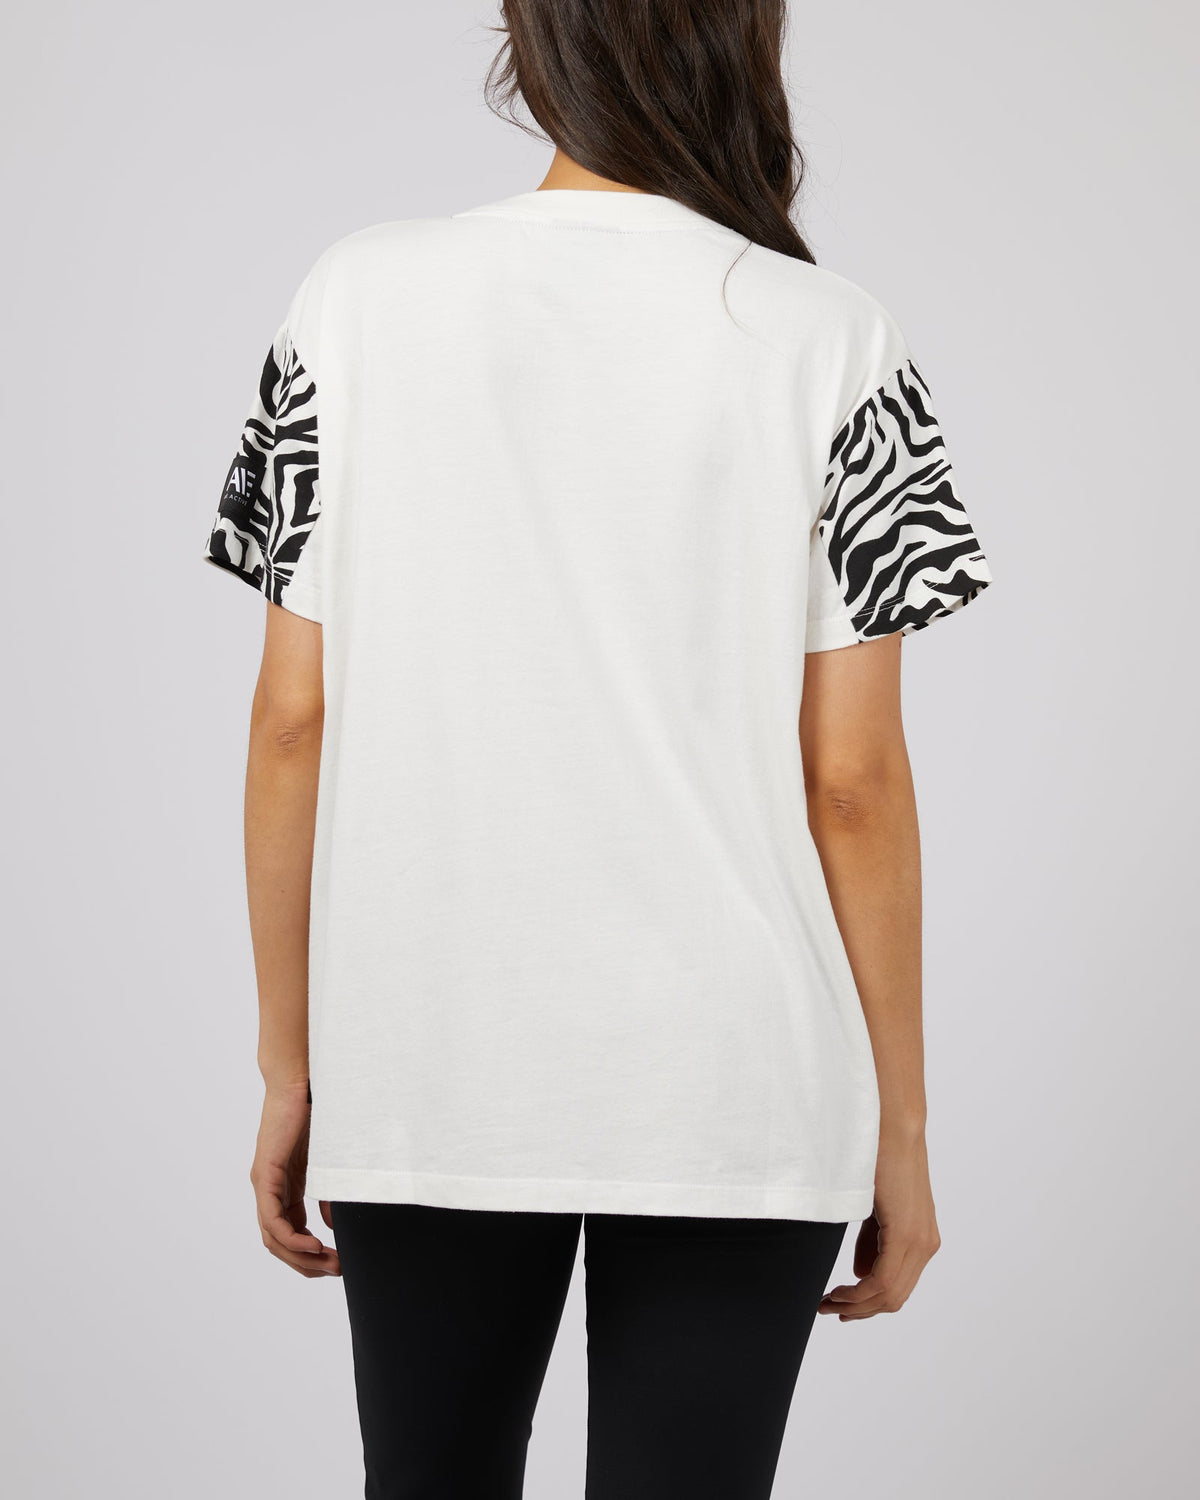 All About Eve-Parker Contrast Tee Vintage White-Edge Clothing